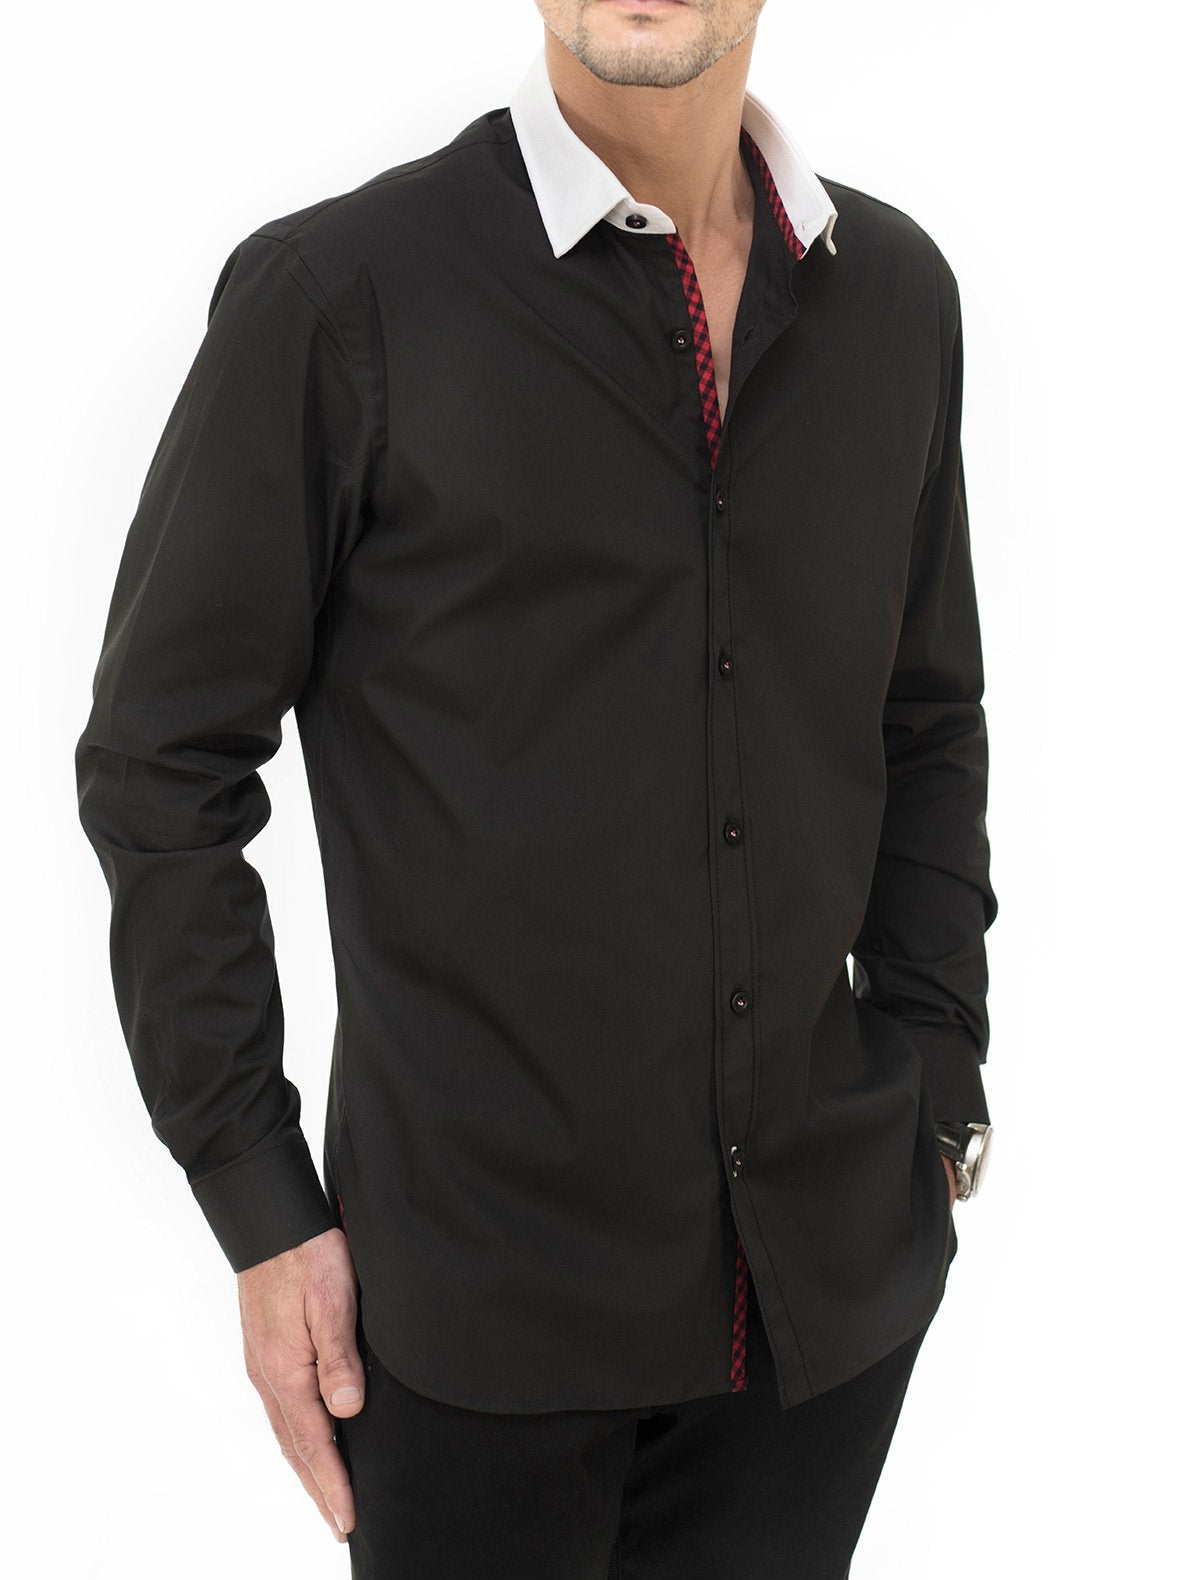 BLACK SHIRT WITH CONTRAST COLLAR